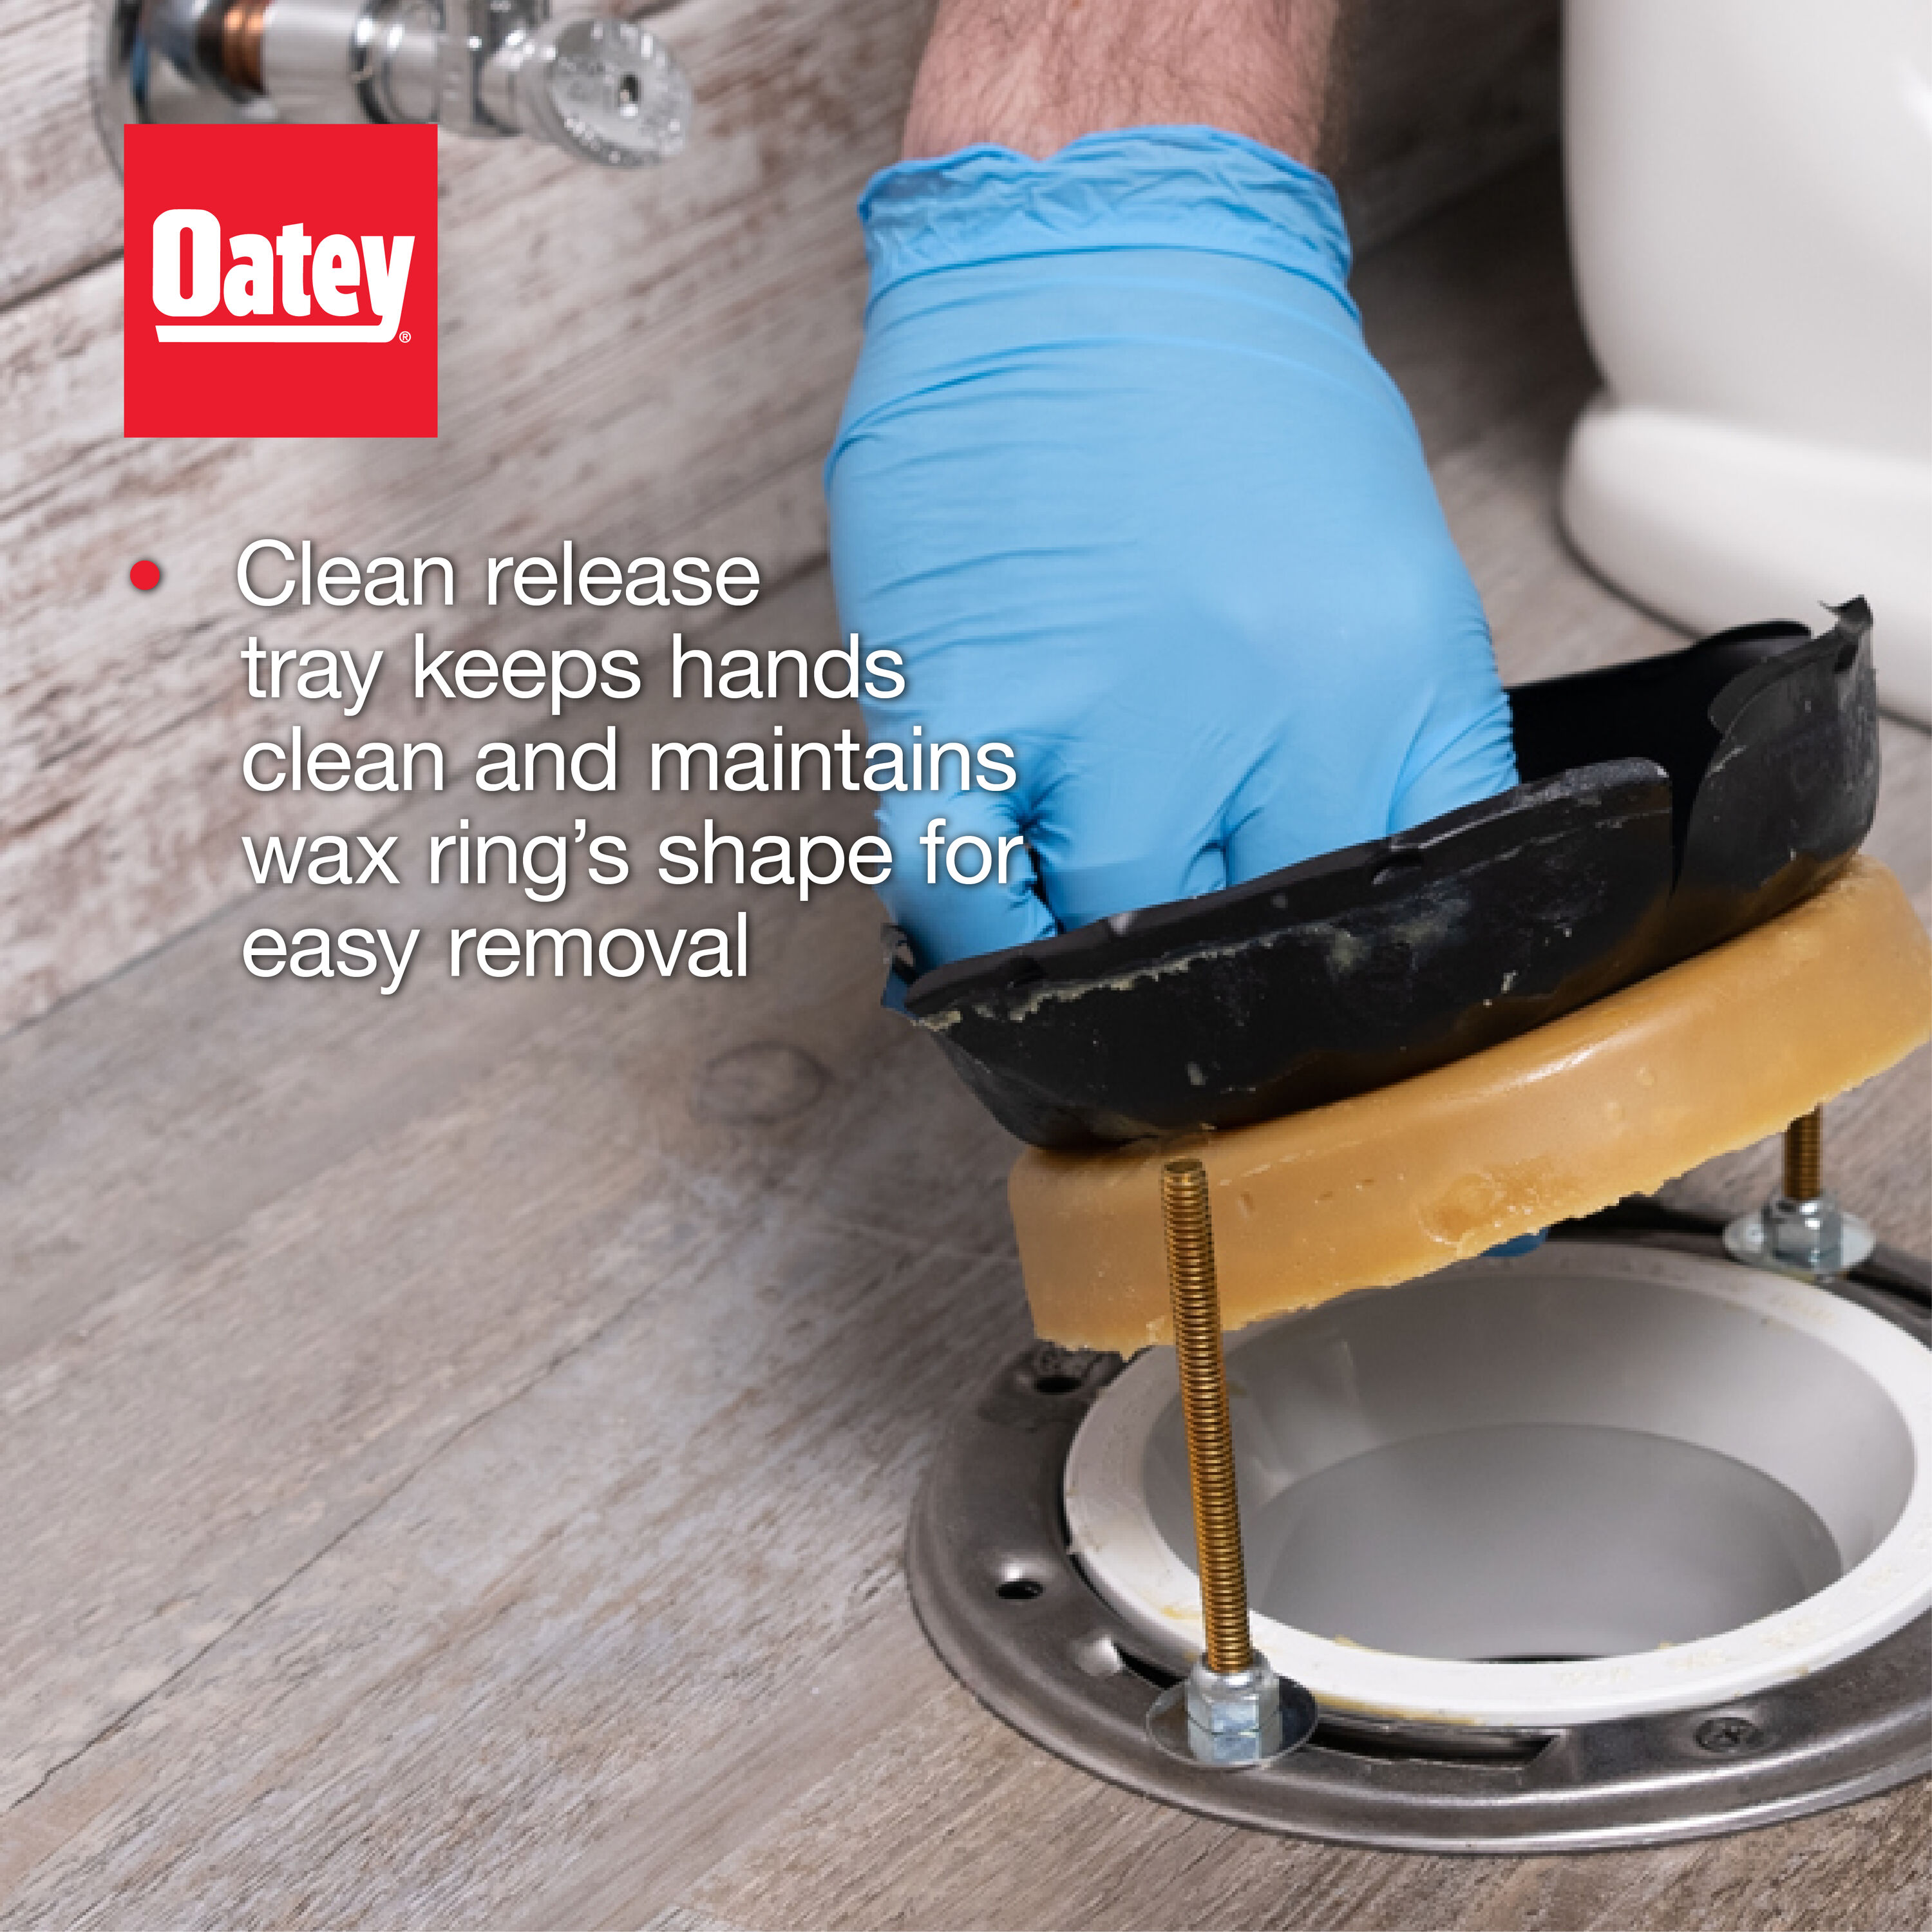 Oatey Jumbo Reinforced Wax Bowl Ring with Polyethylene Sleeve and Bolts